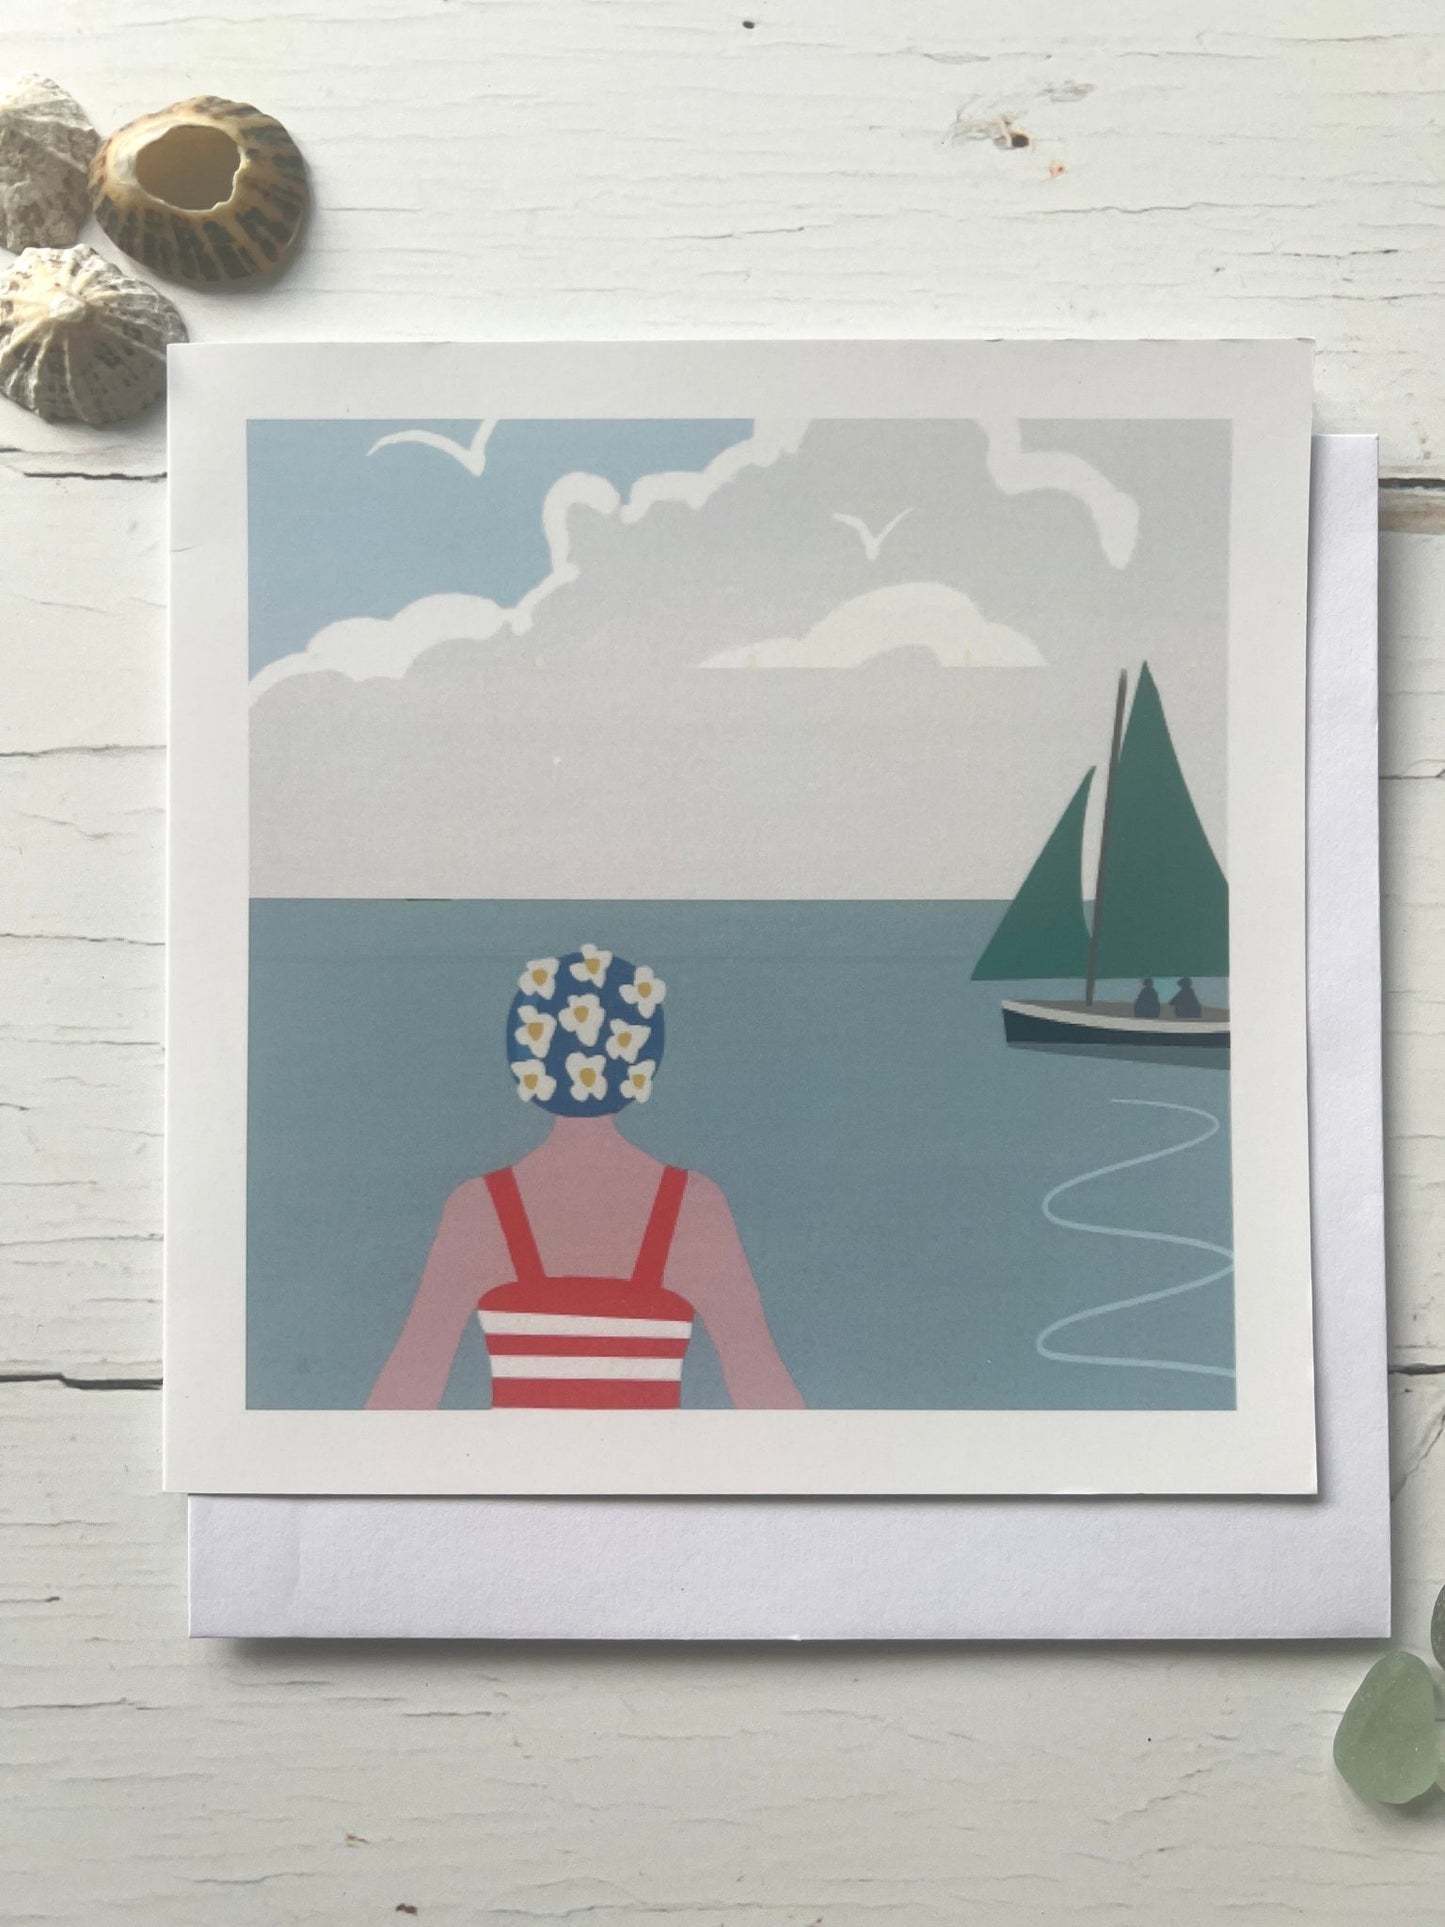 The Swimmer & The Boat Greetings Card - Readymoney Beach Shop